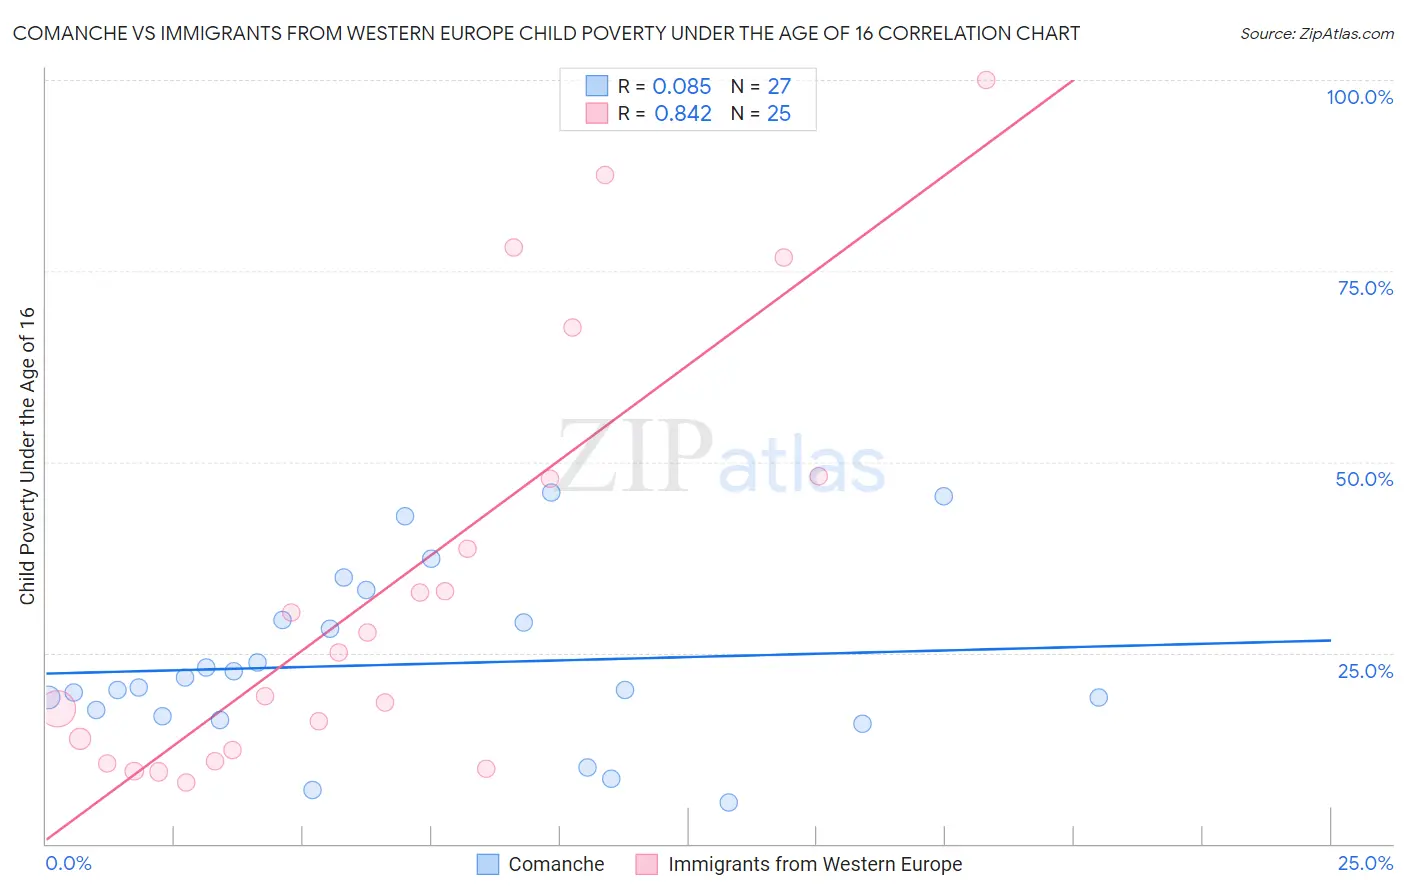 Comanche vs Immigrants from Western Europe Child Poverty Under the Age of 16